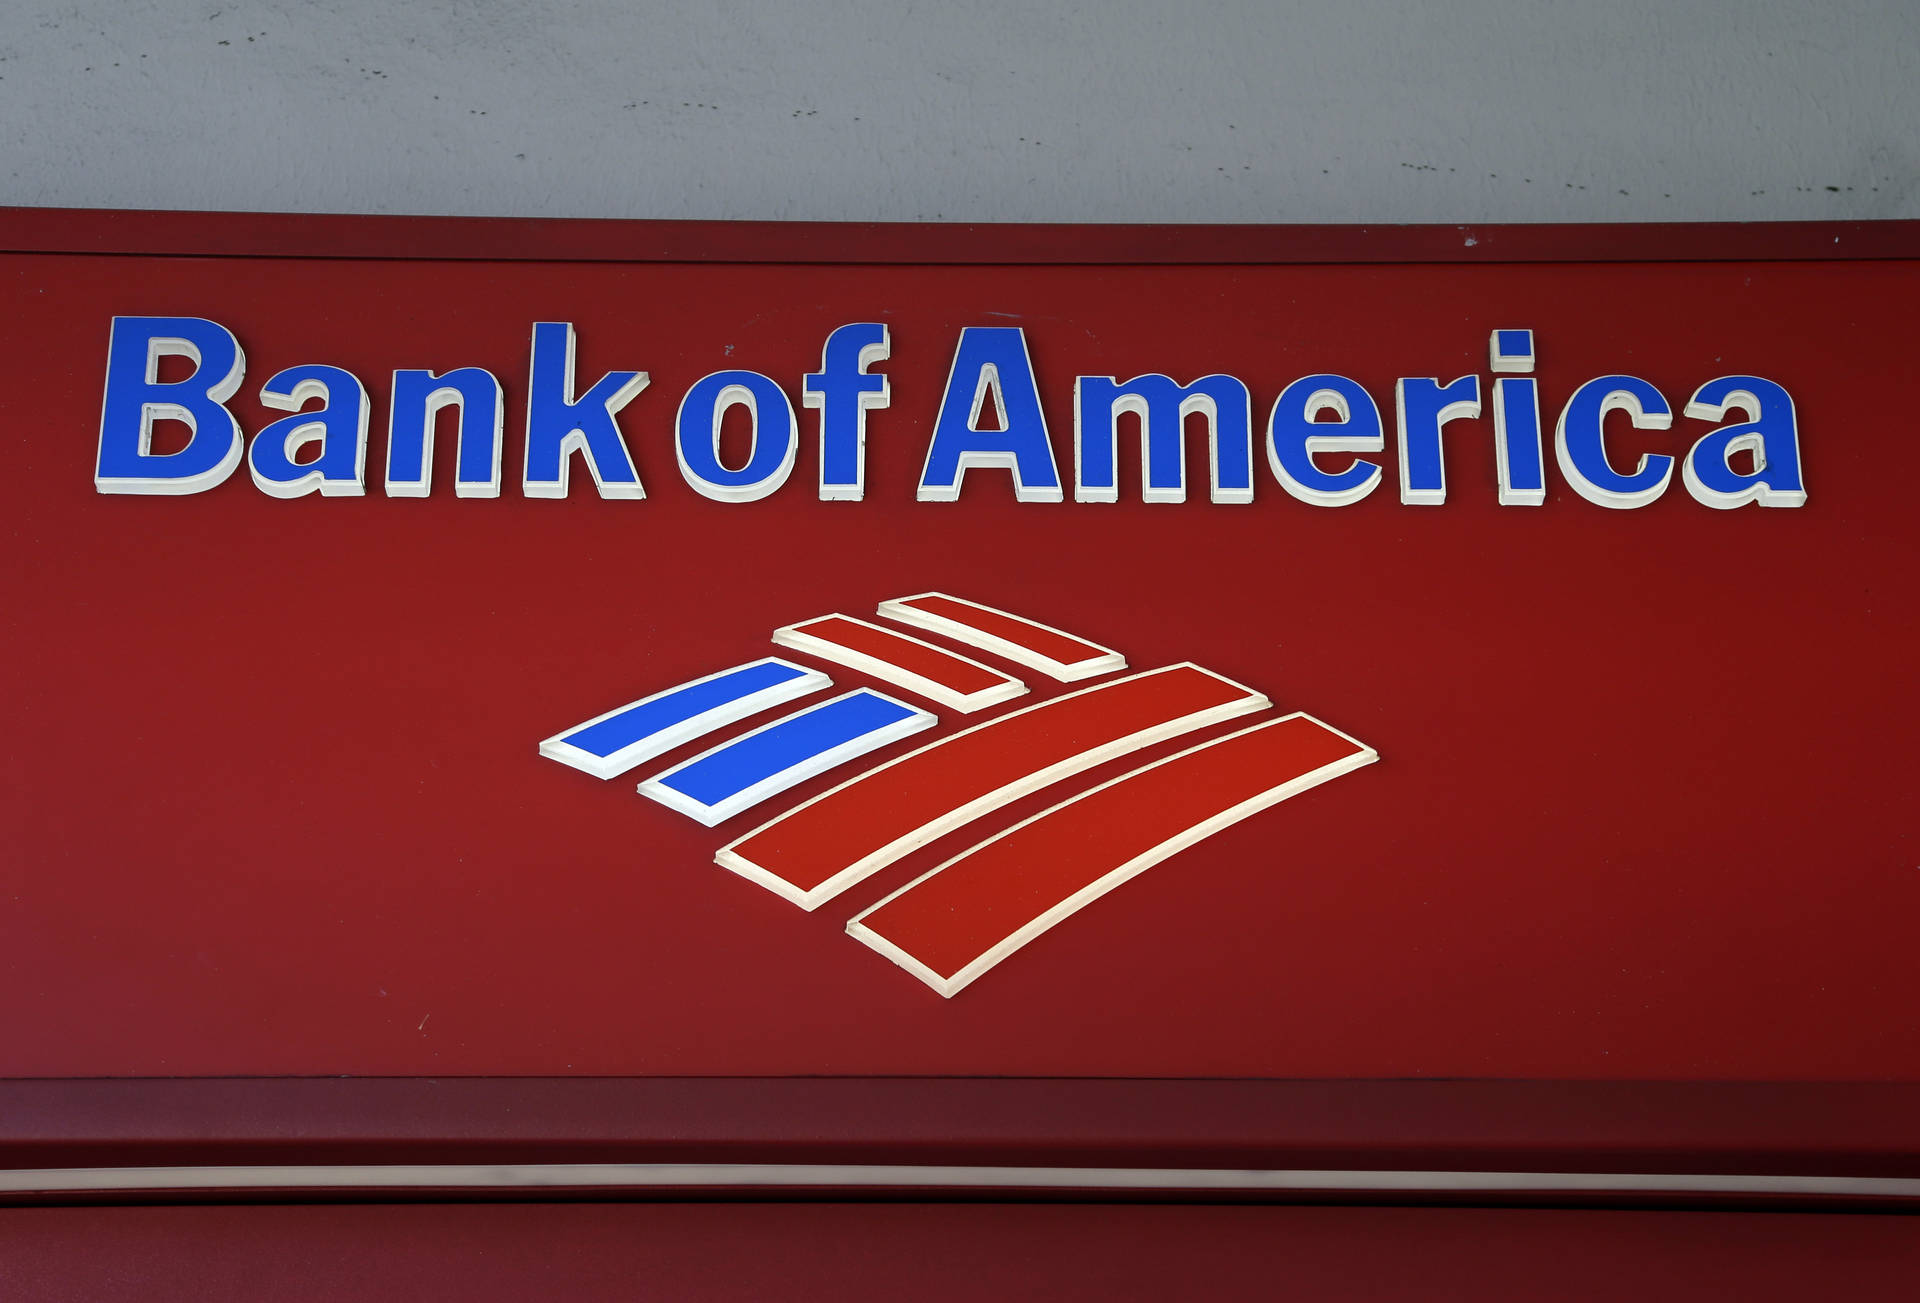 Bank Of America Red Acrylic Signage Wallpaper